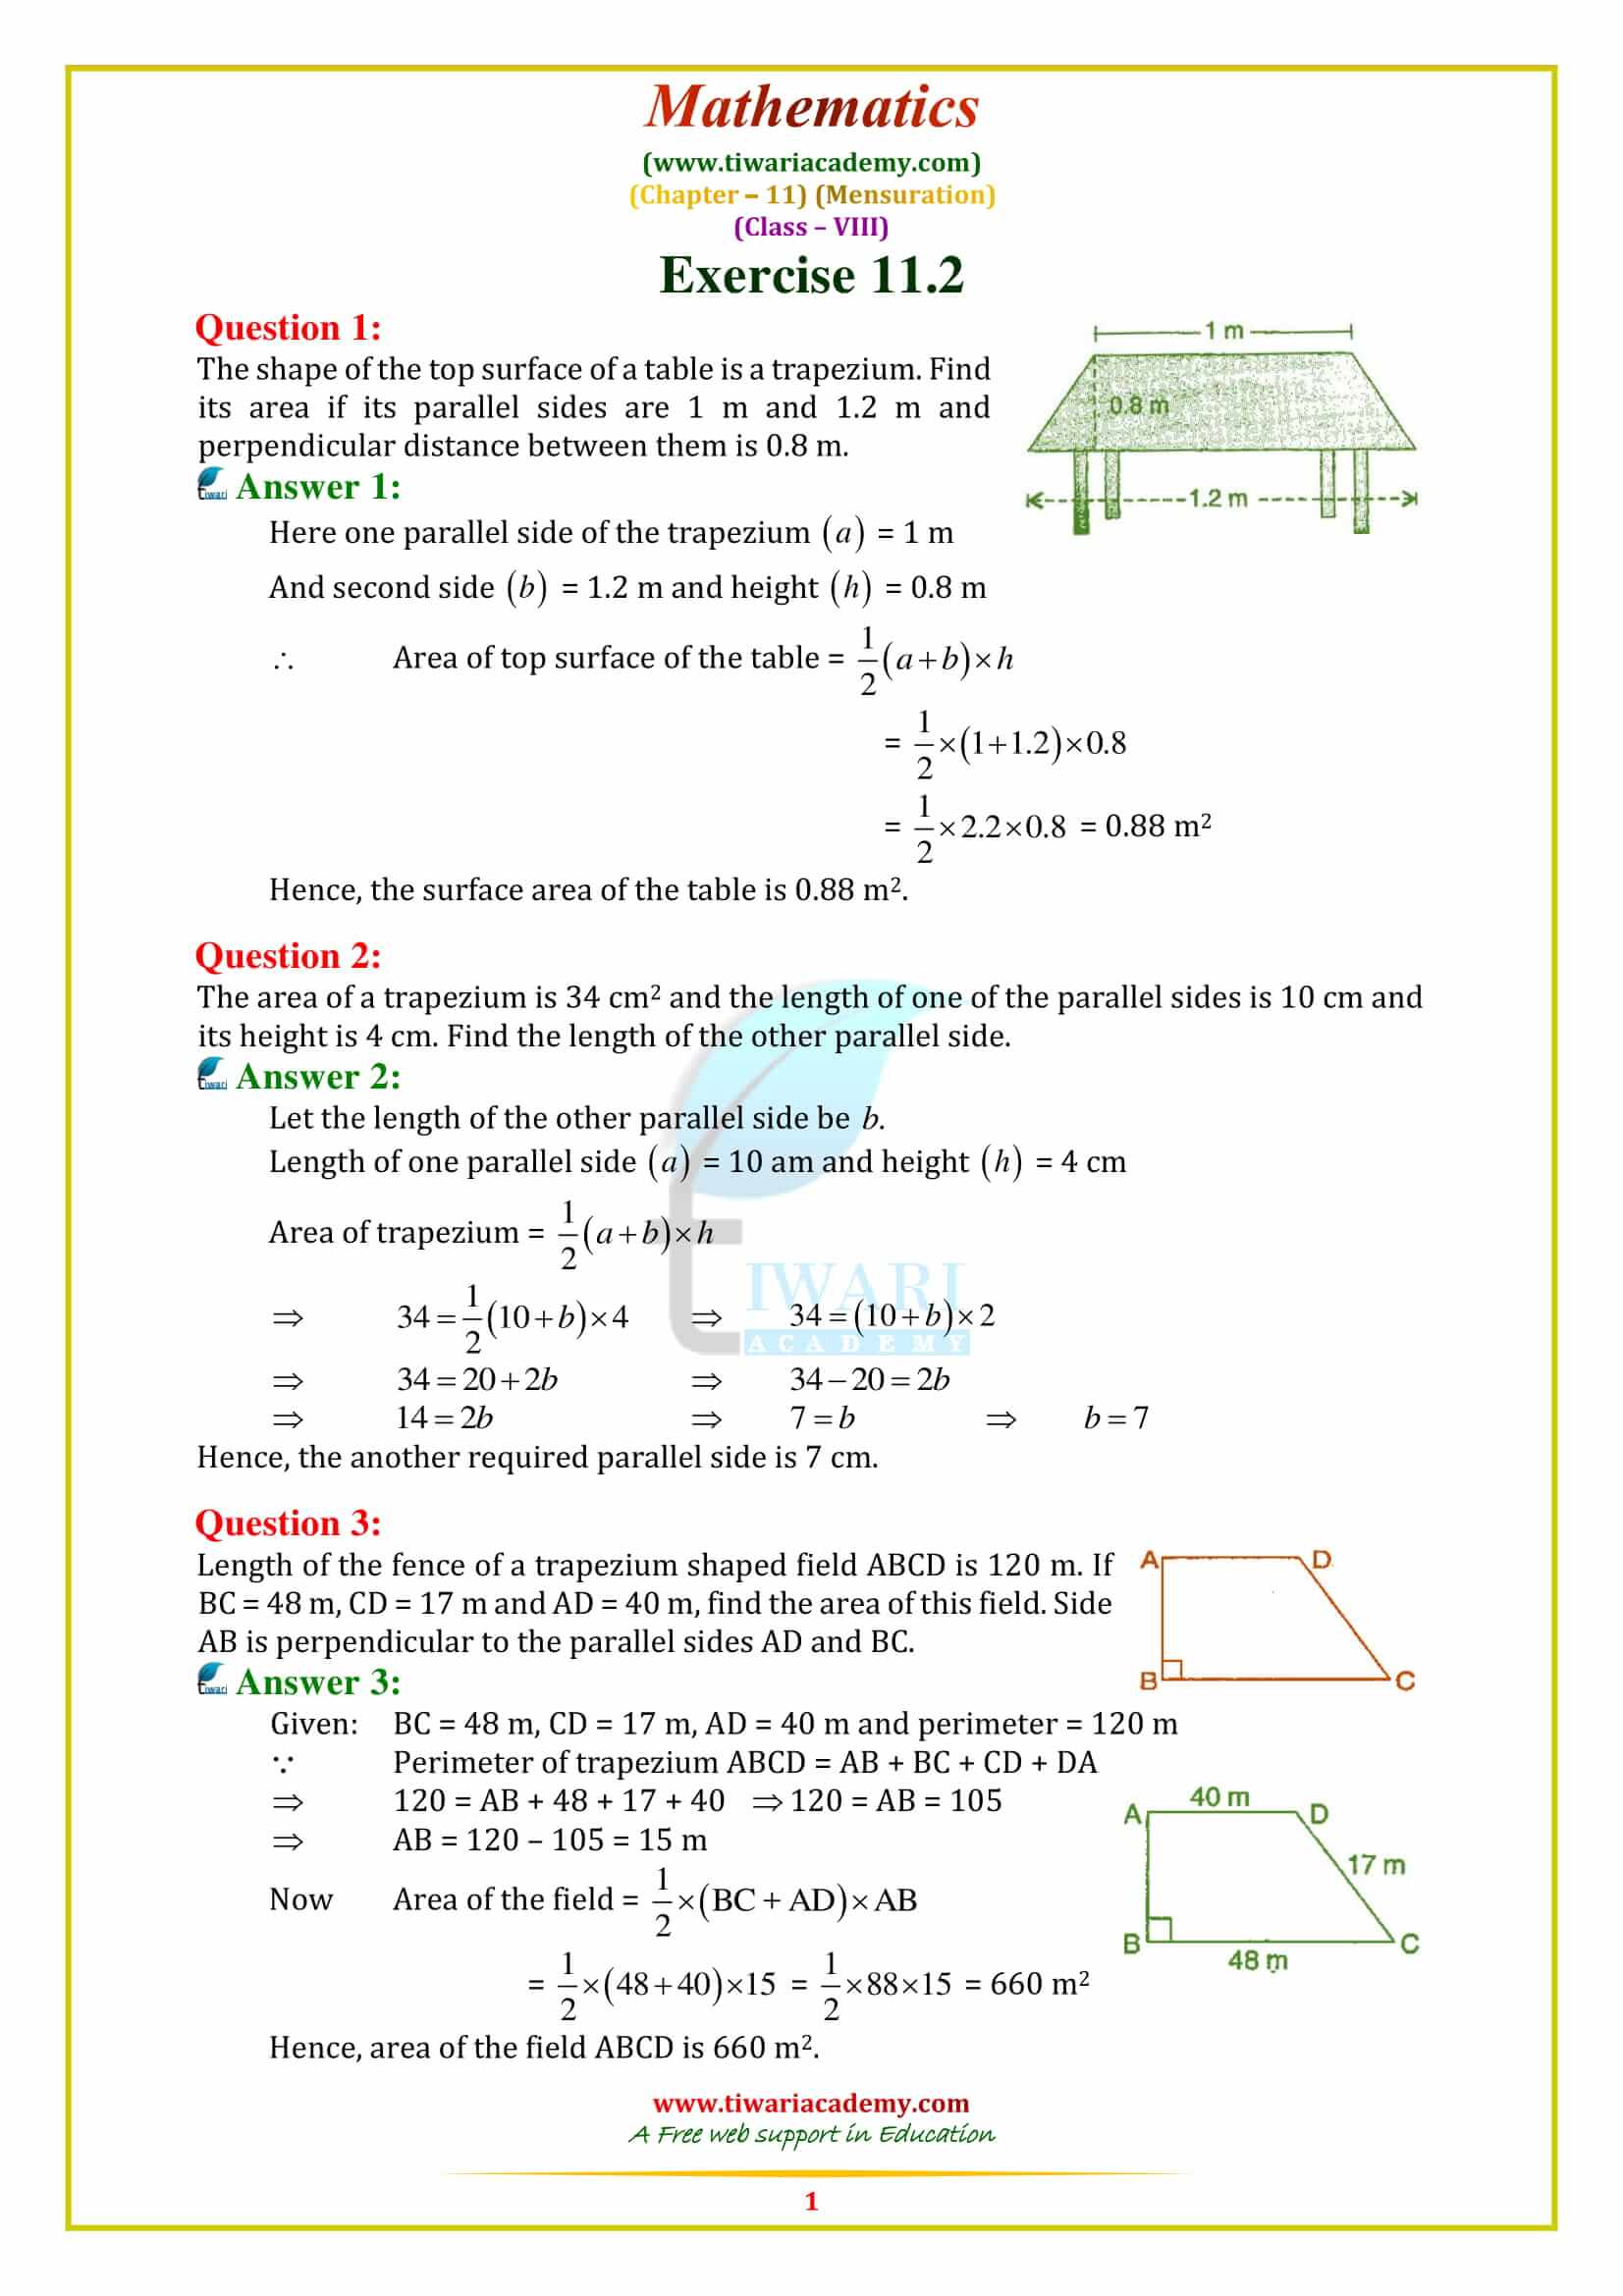 NCERT Solutions for Class 8 Maths Chapter 11 Exercise 11.2